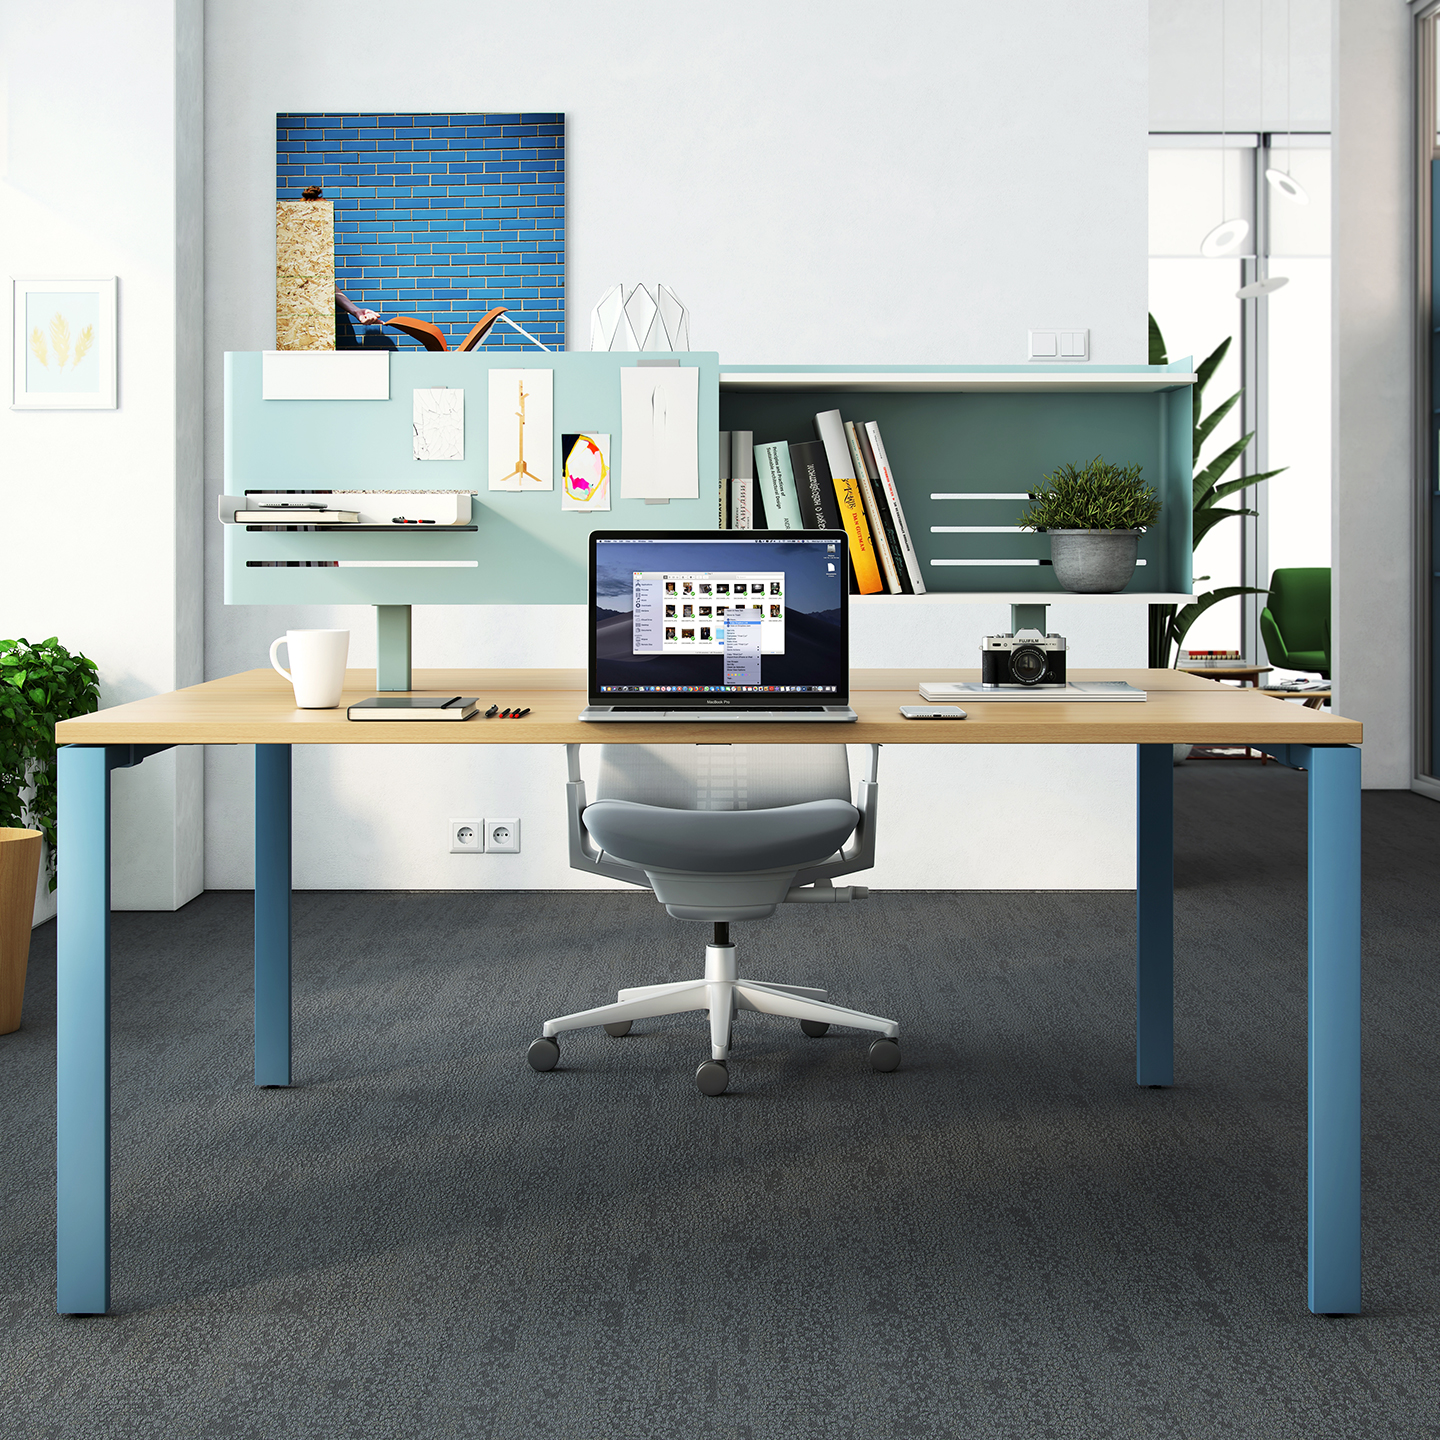 Active Components with shelf over desk in blue with blue table legs